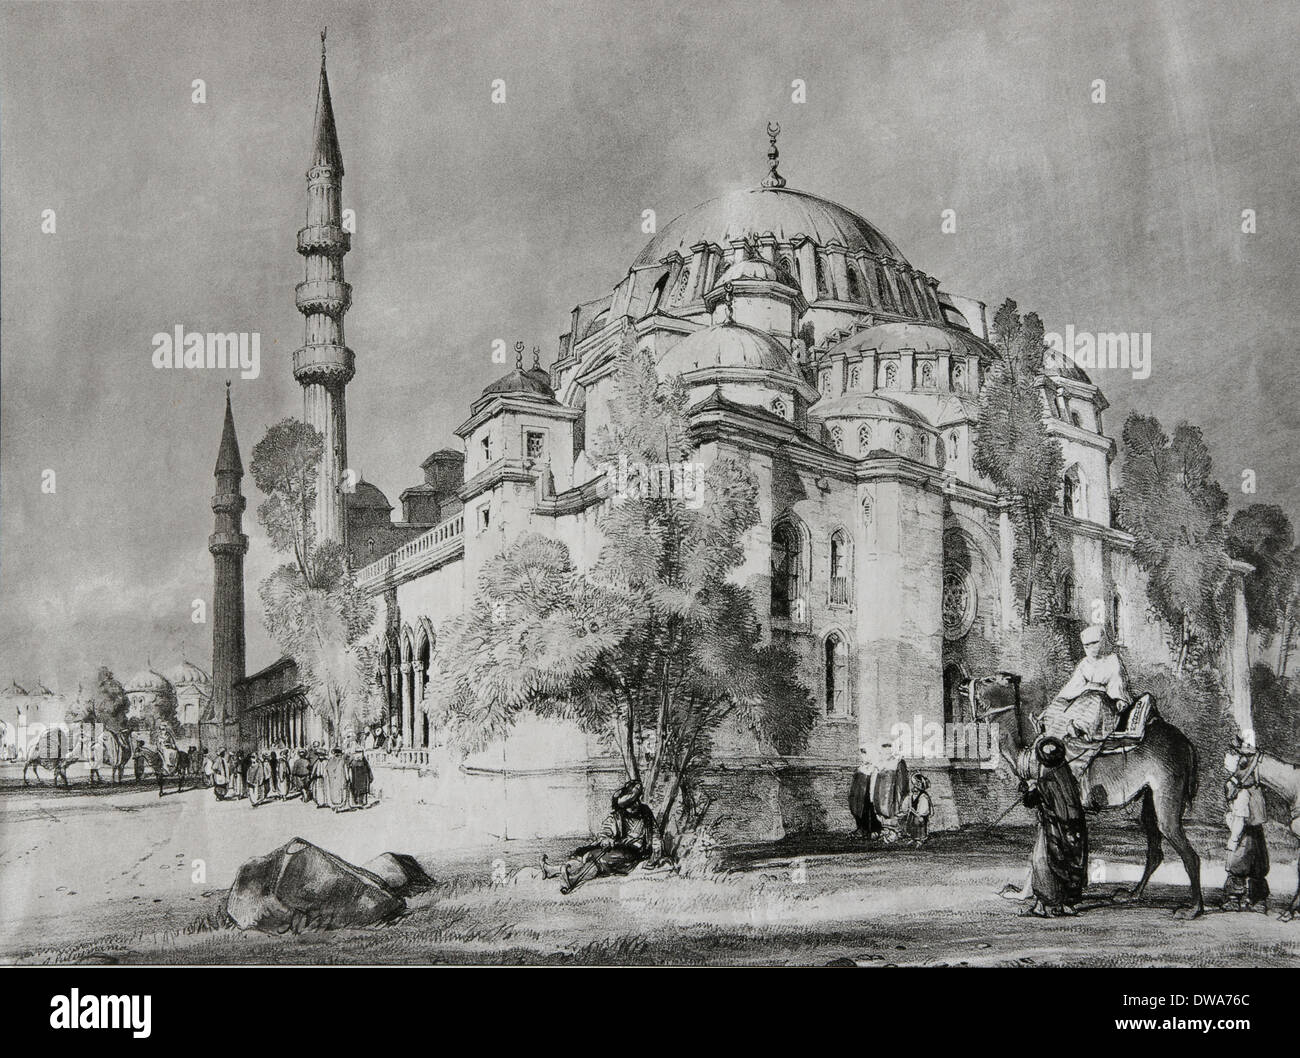 Turkey. Istanbul. Suleymaniye Mosque. According of sketch by Coke Smith. Engraving by J.F. Lewis. 19th century. Stock Photo